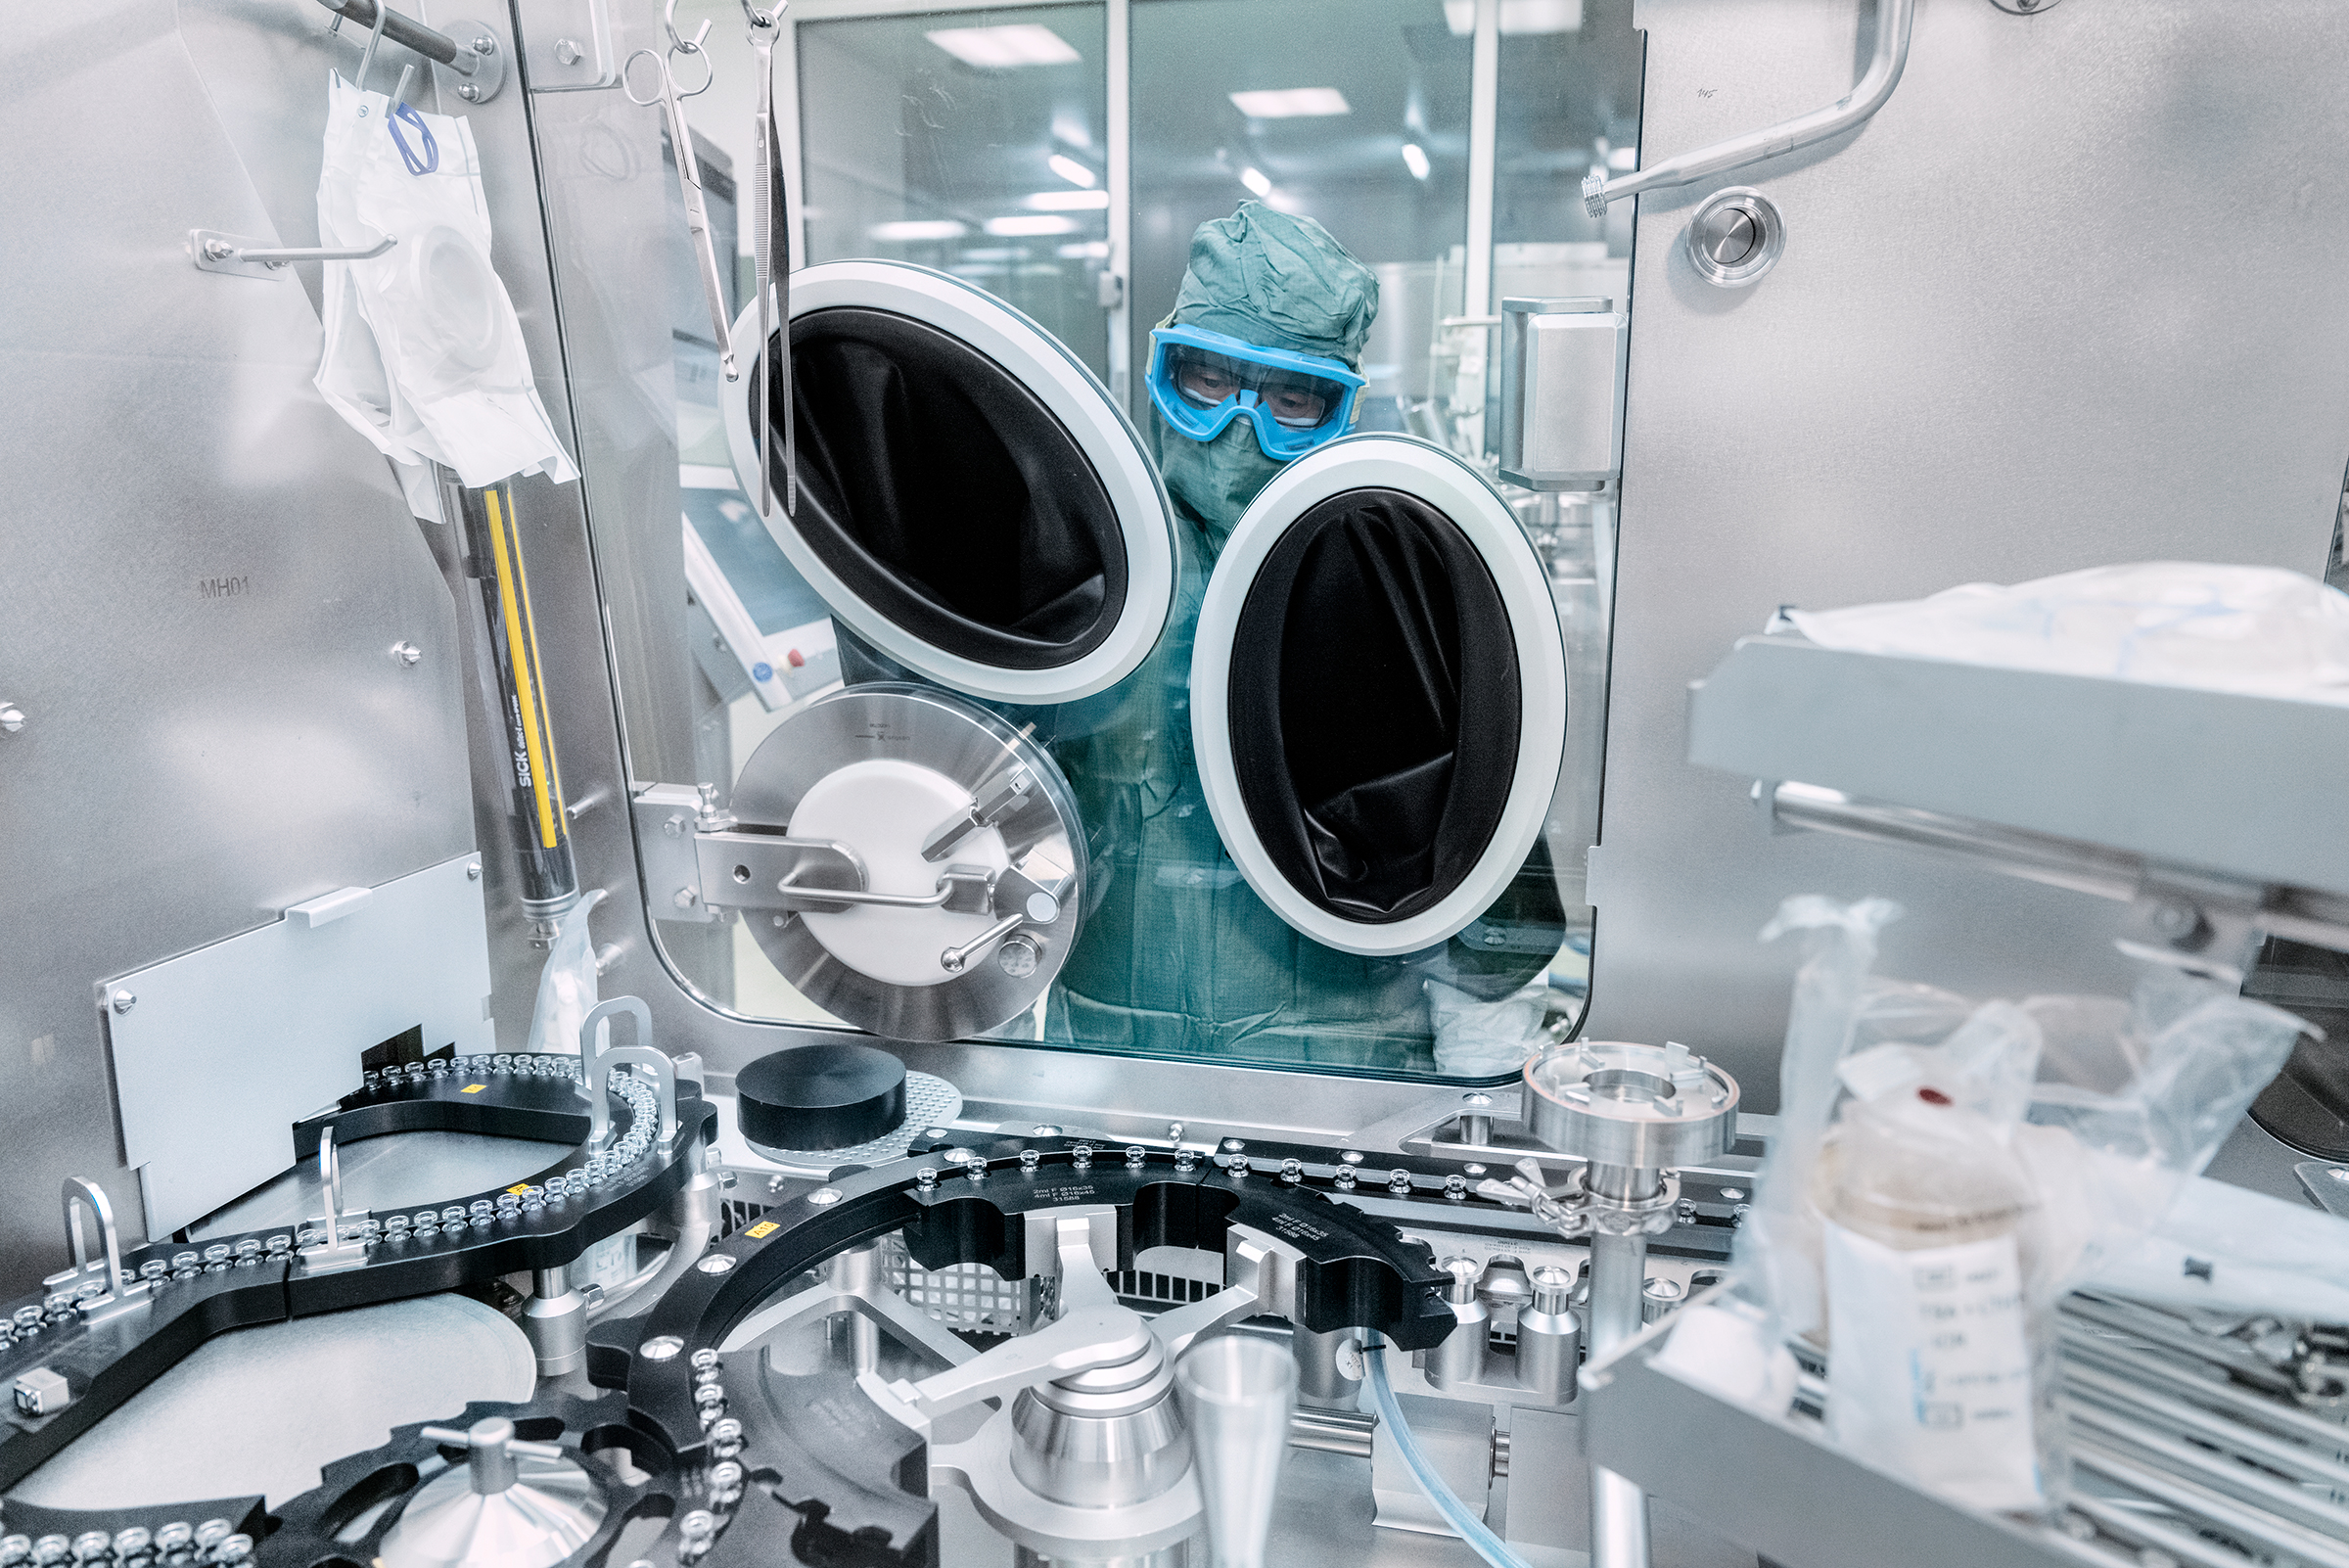 At the fill-and-finish facility operated by Baxter in Halle, 120 miles north of Marburg, technicians monitor the washing and sterilization of the vials before they are filled with vaccine, then stoppered and sealed.